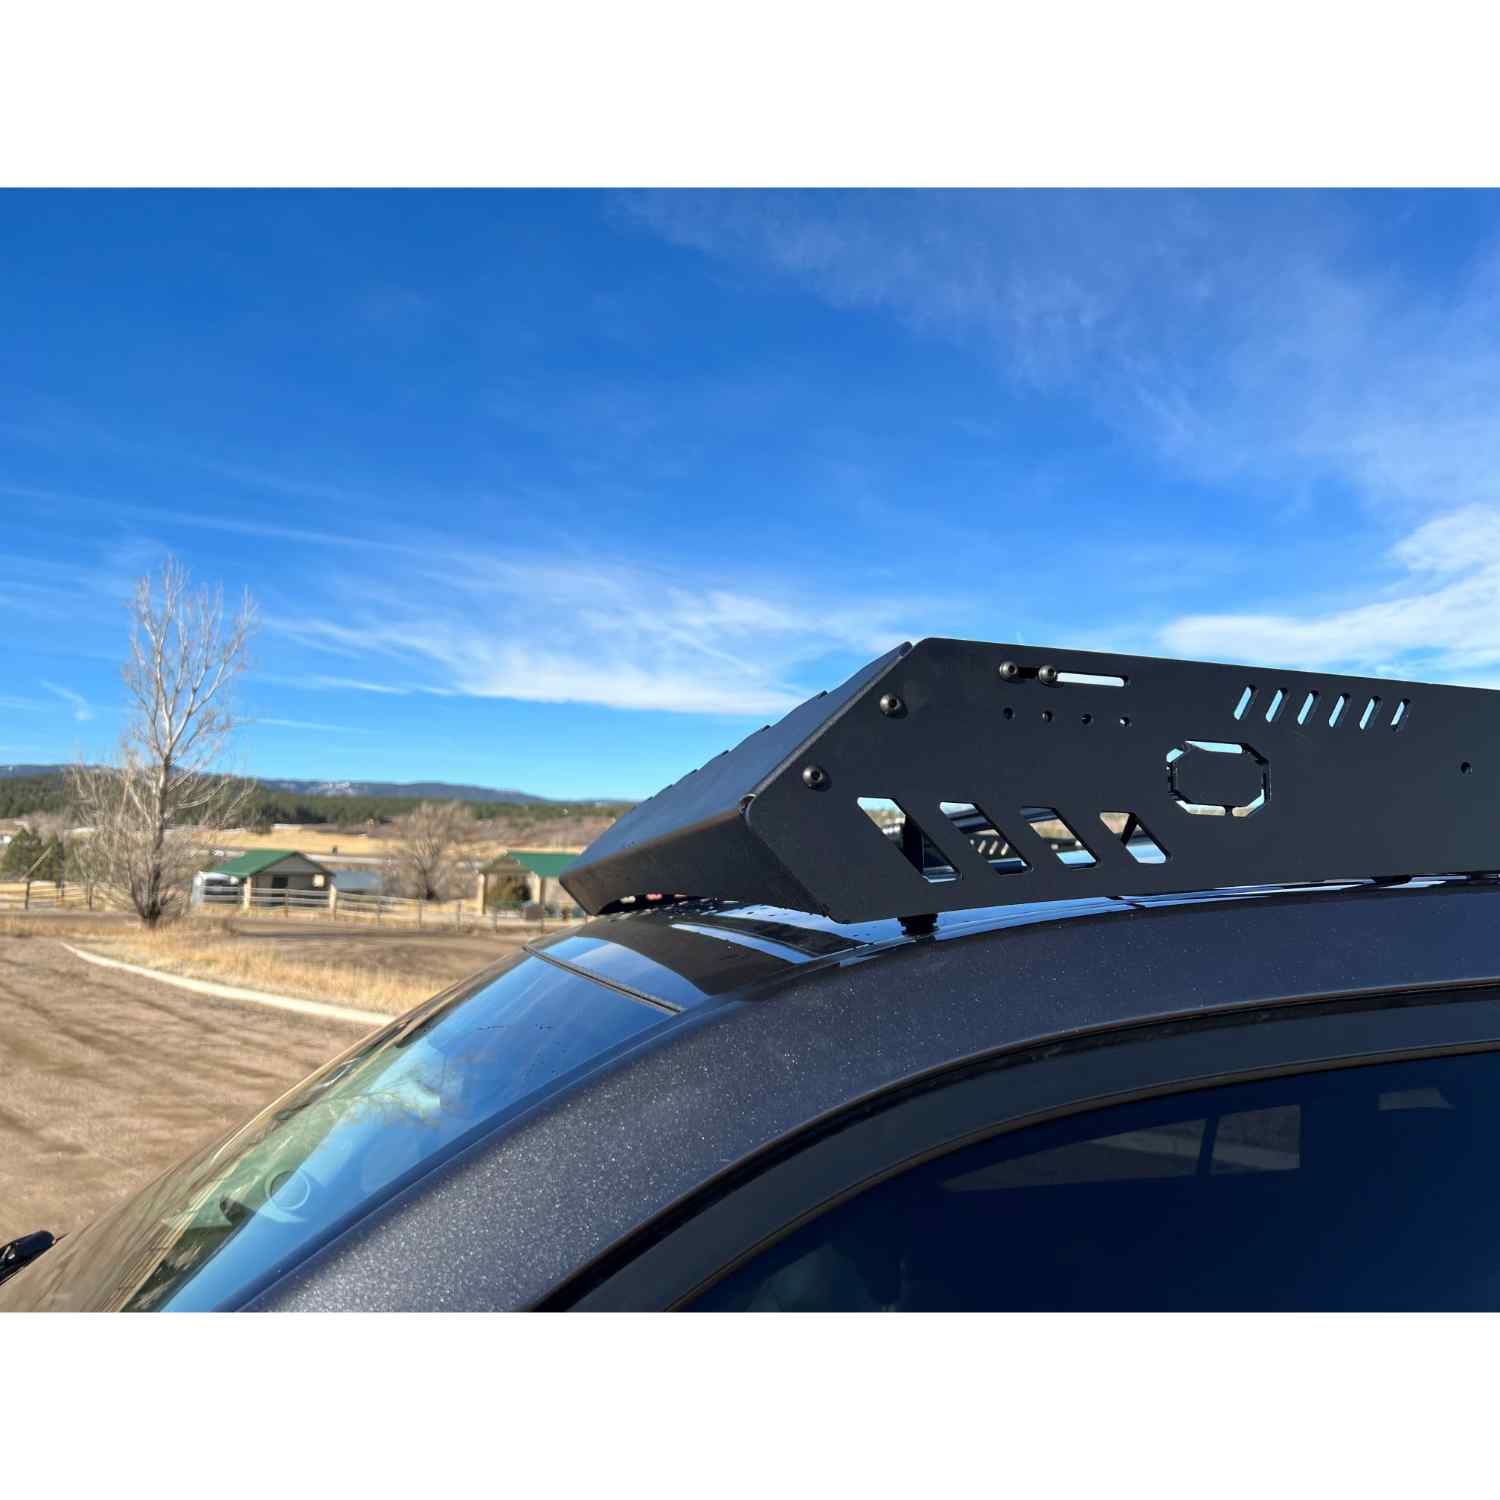 Uptop Overland Bravo 2007-2021 Toyota Land Cruiser 200 7th Generation Roof Rack Front Closed View